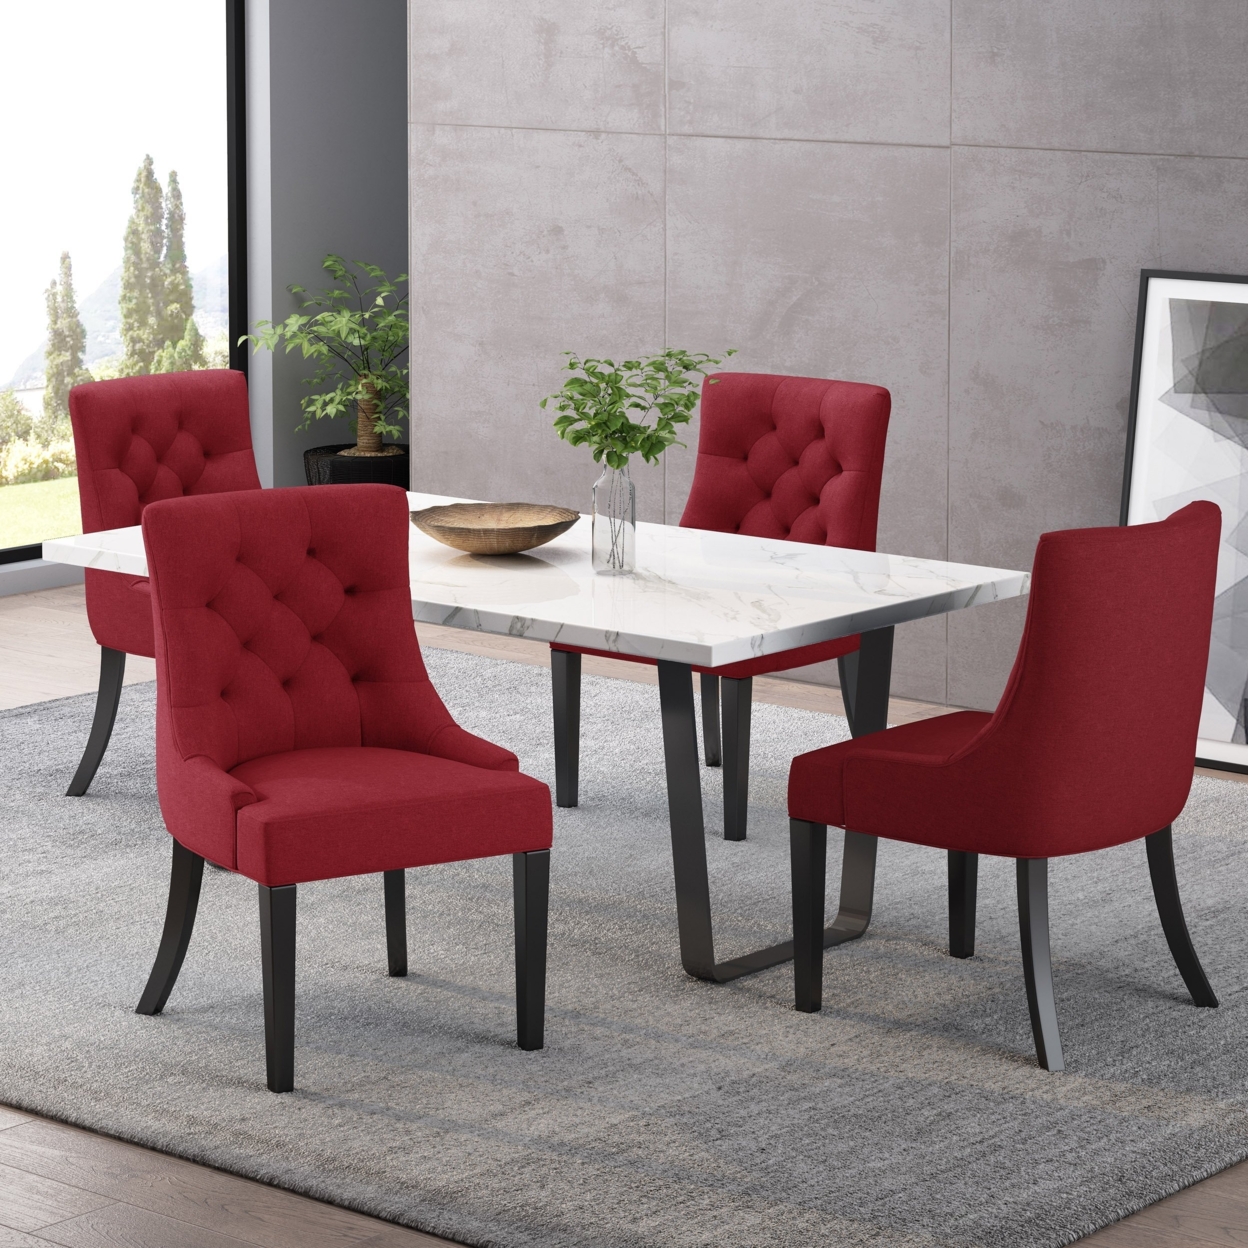 Stacy Hourglass Fabric Dining Chairs (Set Of 4) - Deep Red